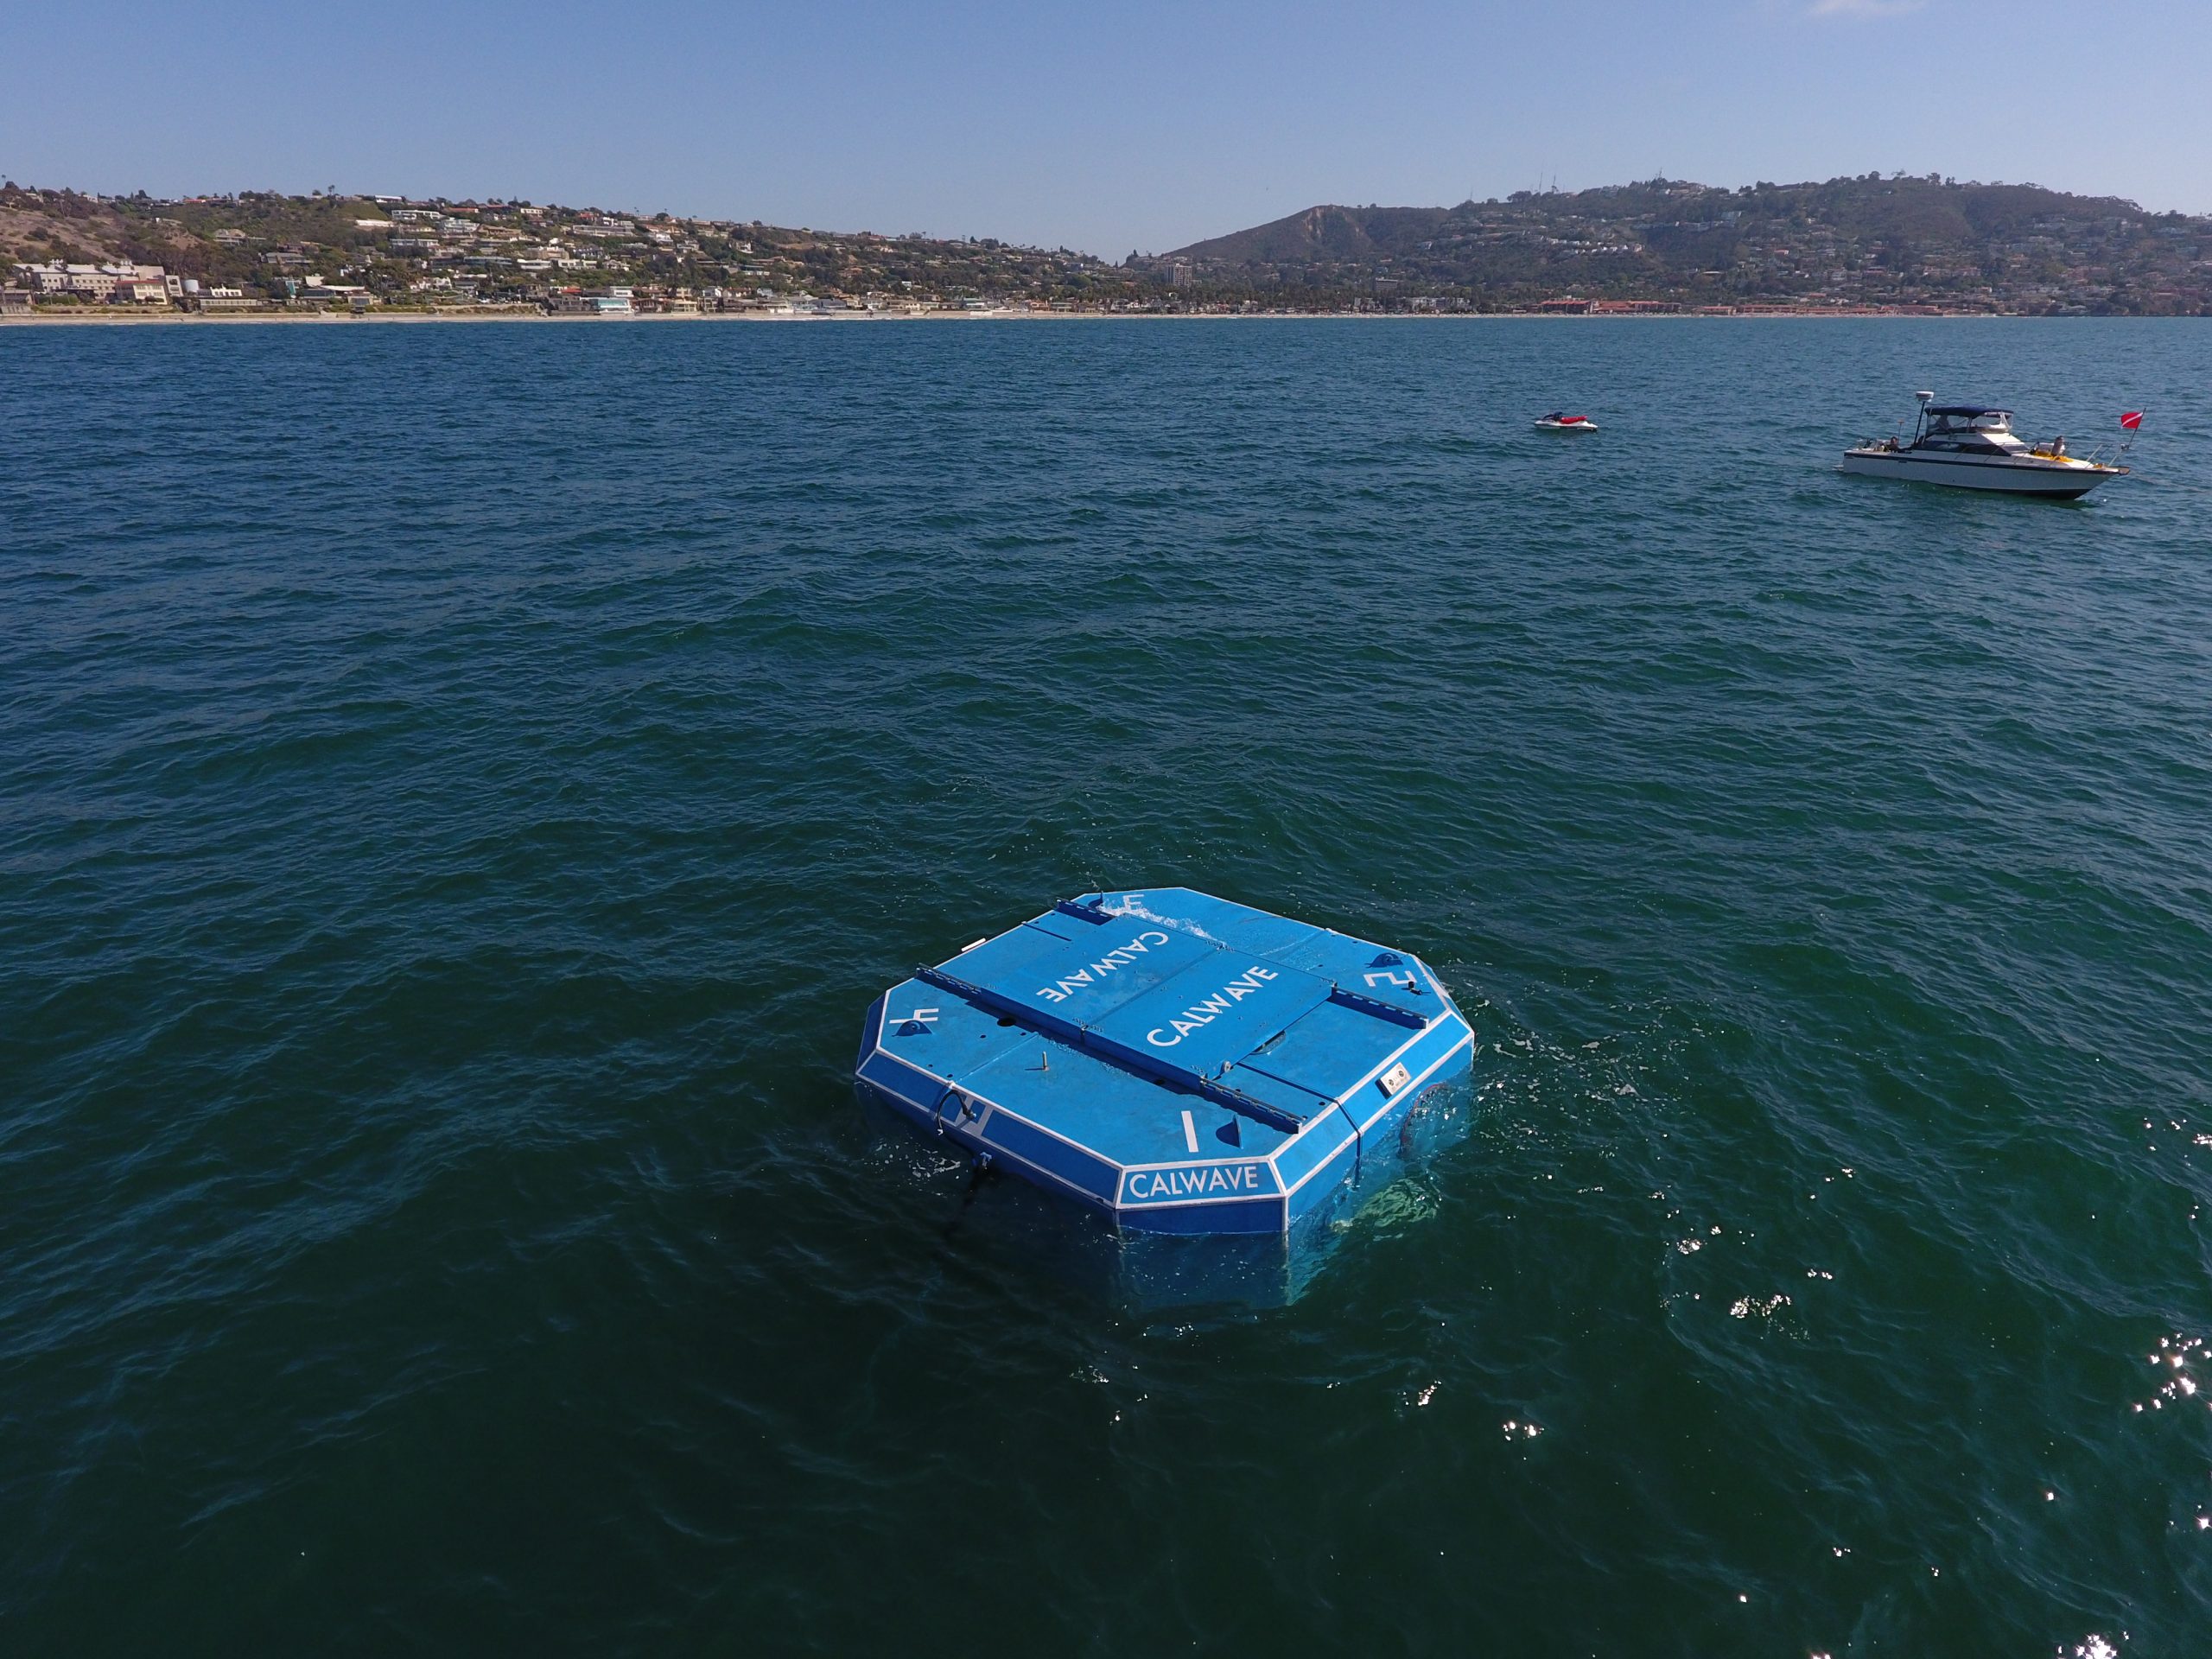 CalWave's wave energy converter deployed offshore near Scripps Institute of Oceanography in Sand Diego. Photo courtesy of CalWave.